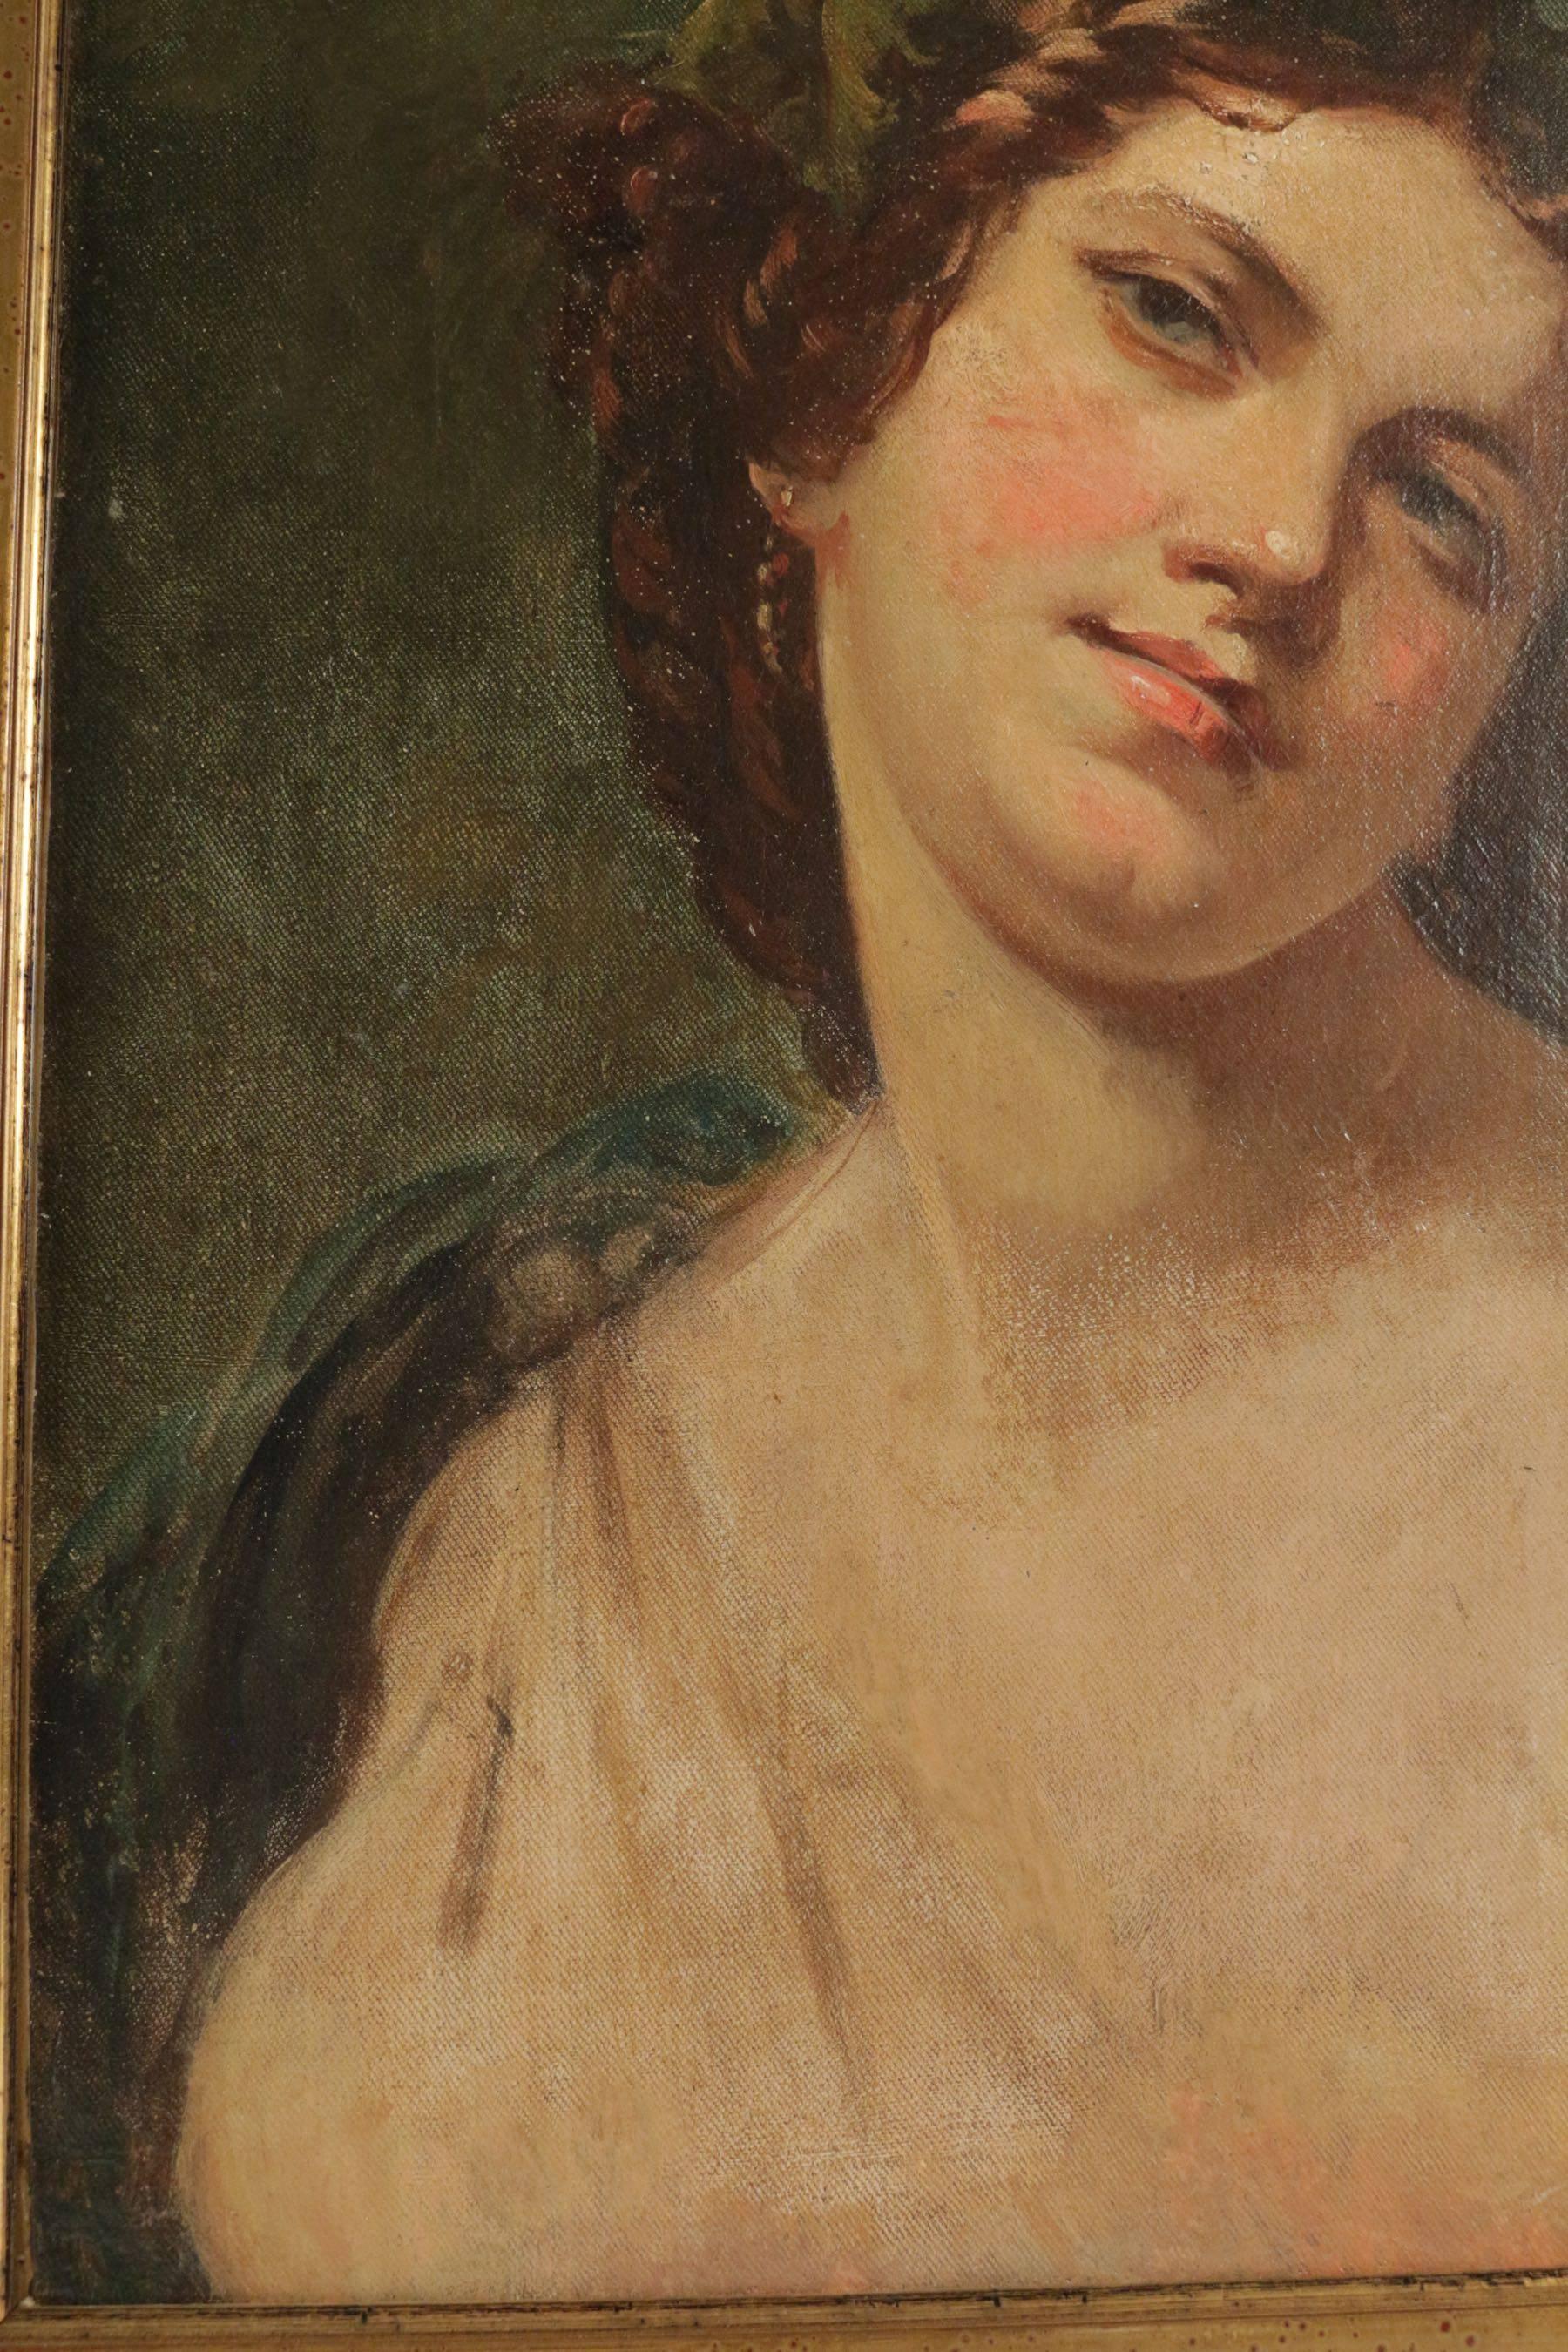 French Elegant Portrait of the 19th Century Representing a Romantic Pose of a Woman For Sale